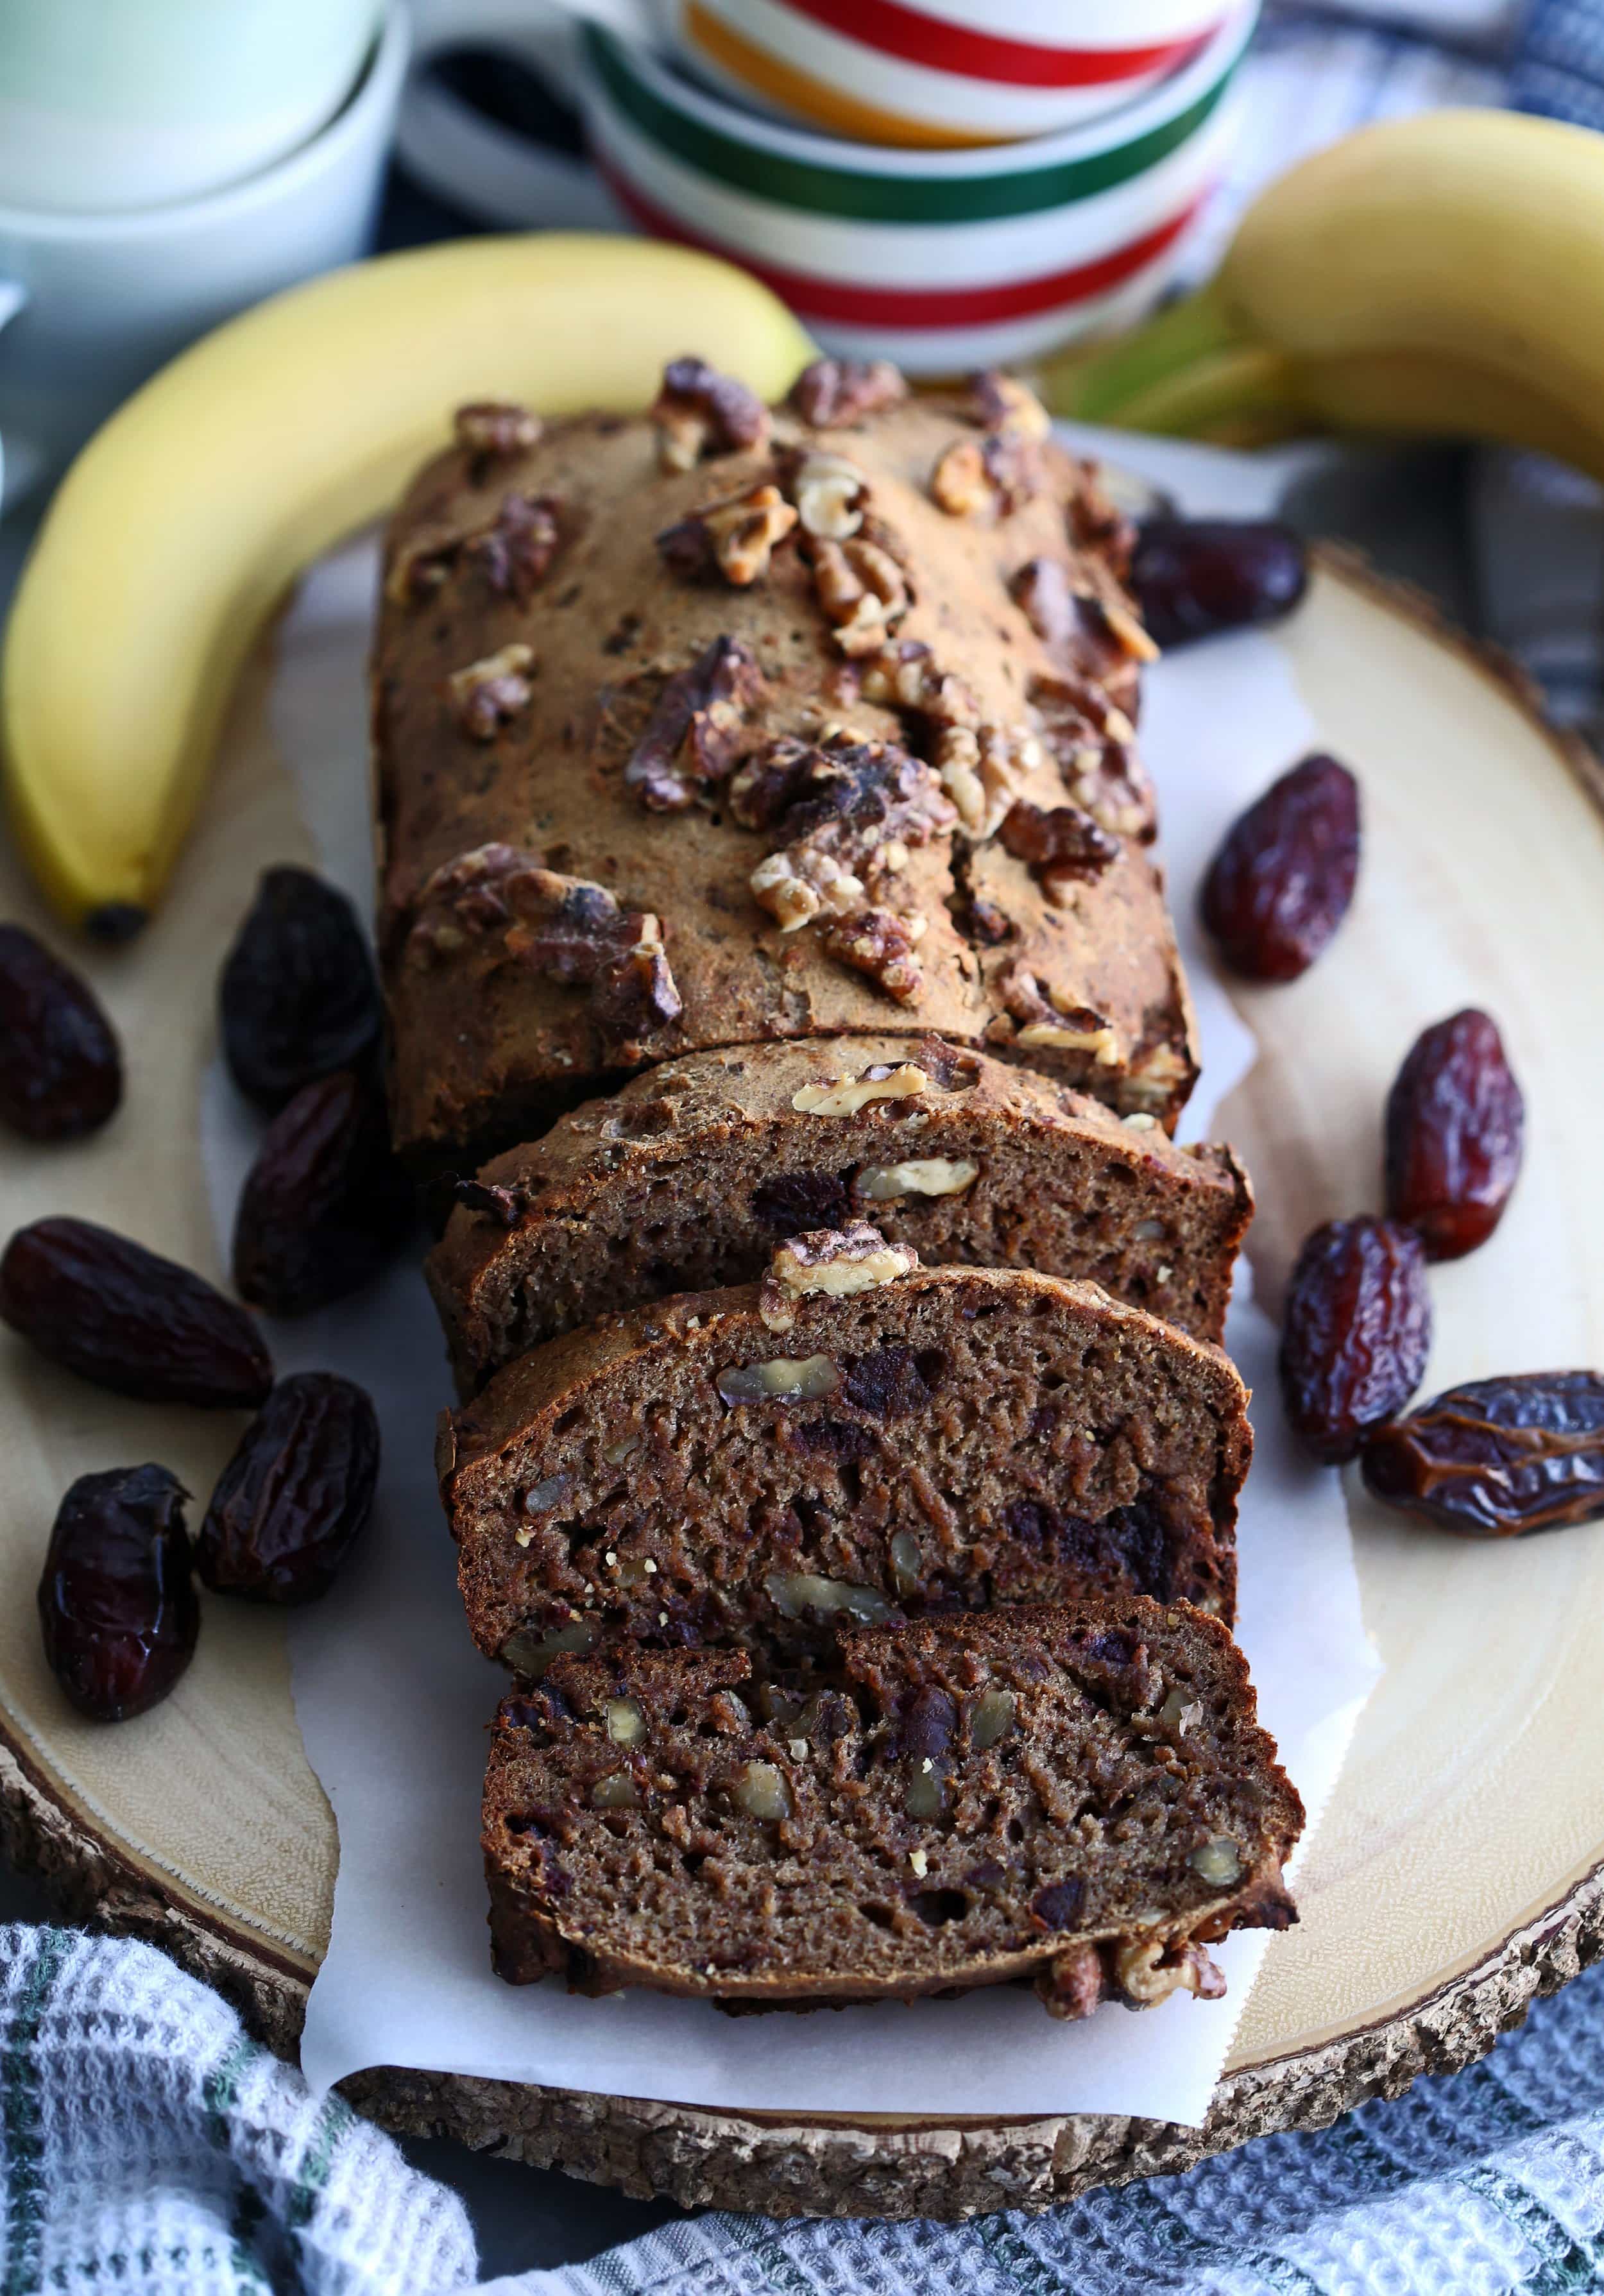 Date Banana Nut Bread - Yay! For Food